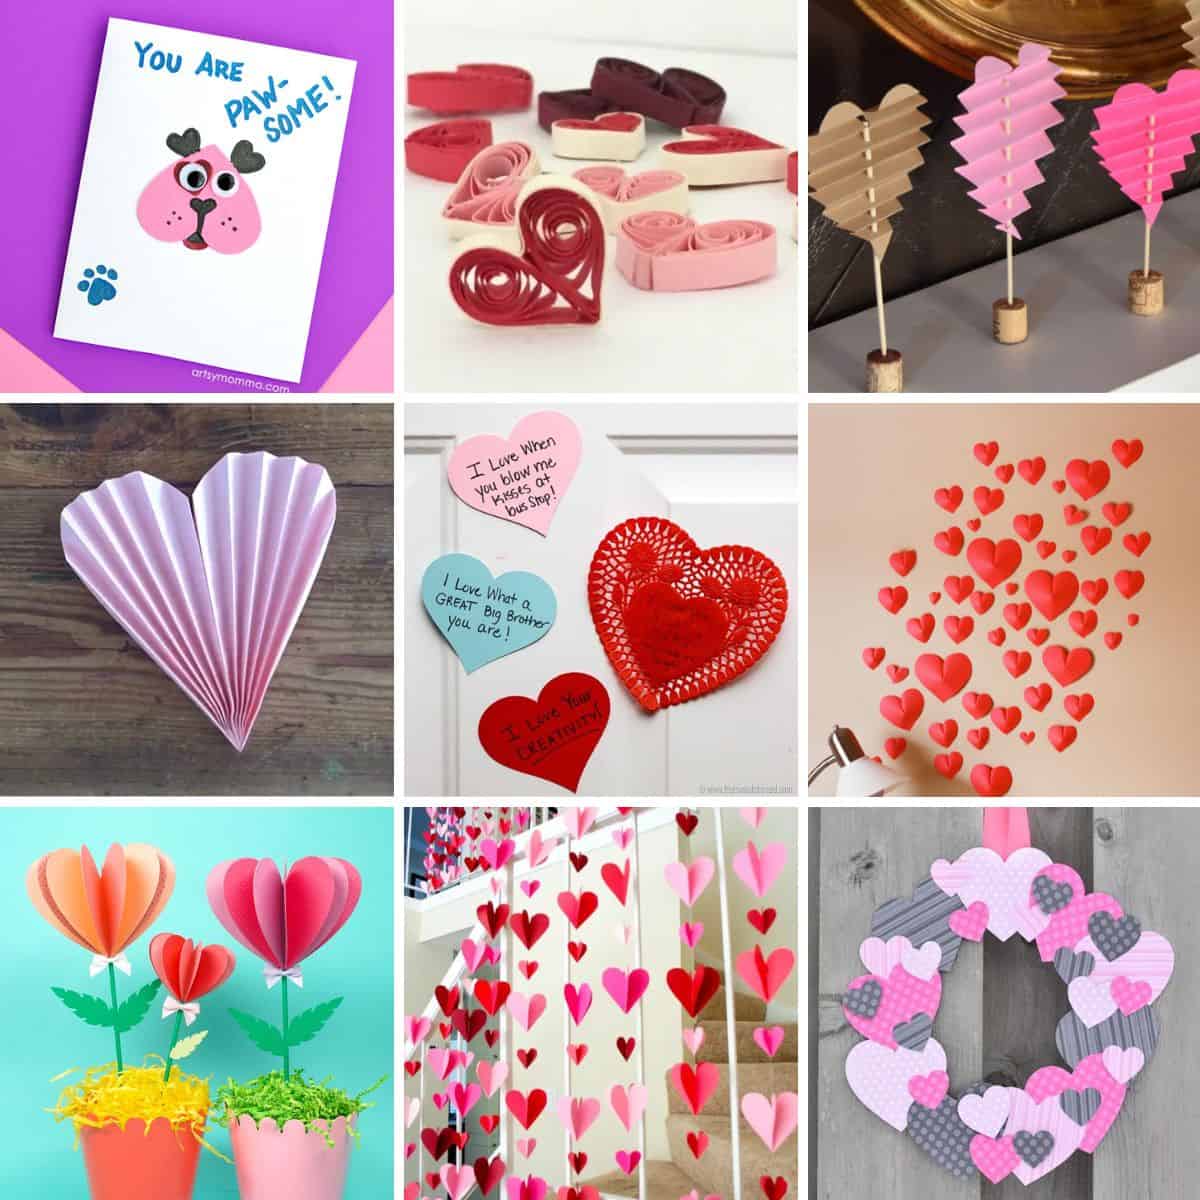 50 Red & White Cut Out Paper Hearts - Handmade, Arts & Crafts Pieces,  Valentines